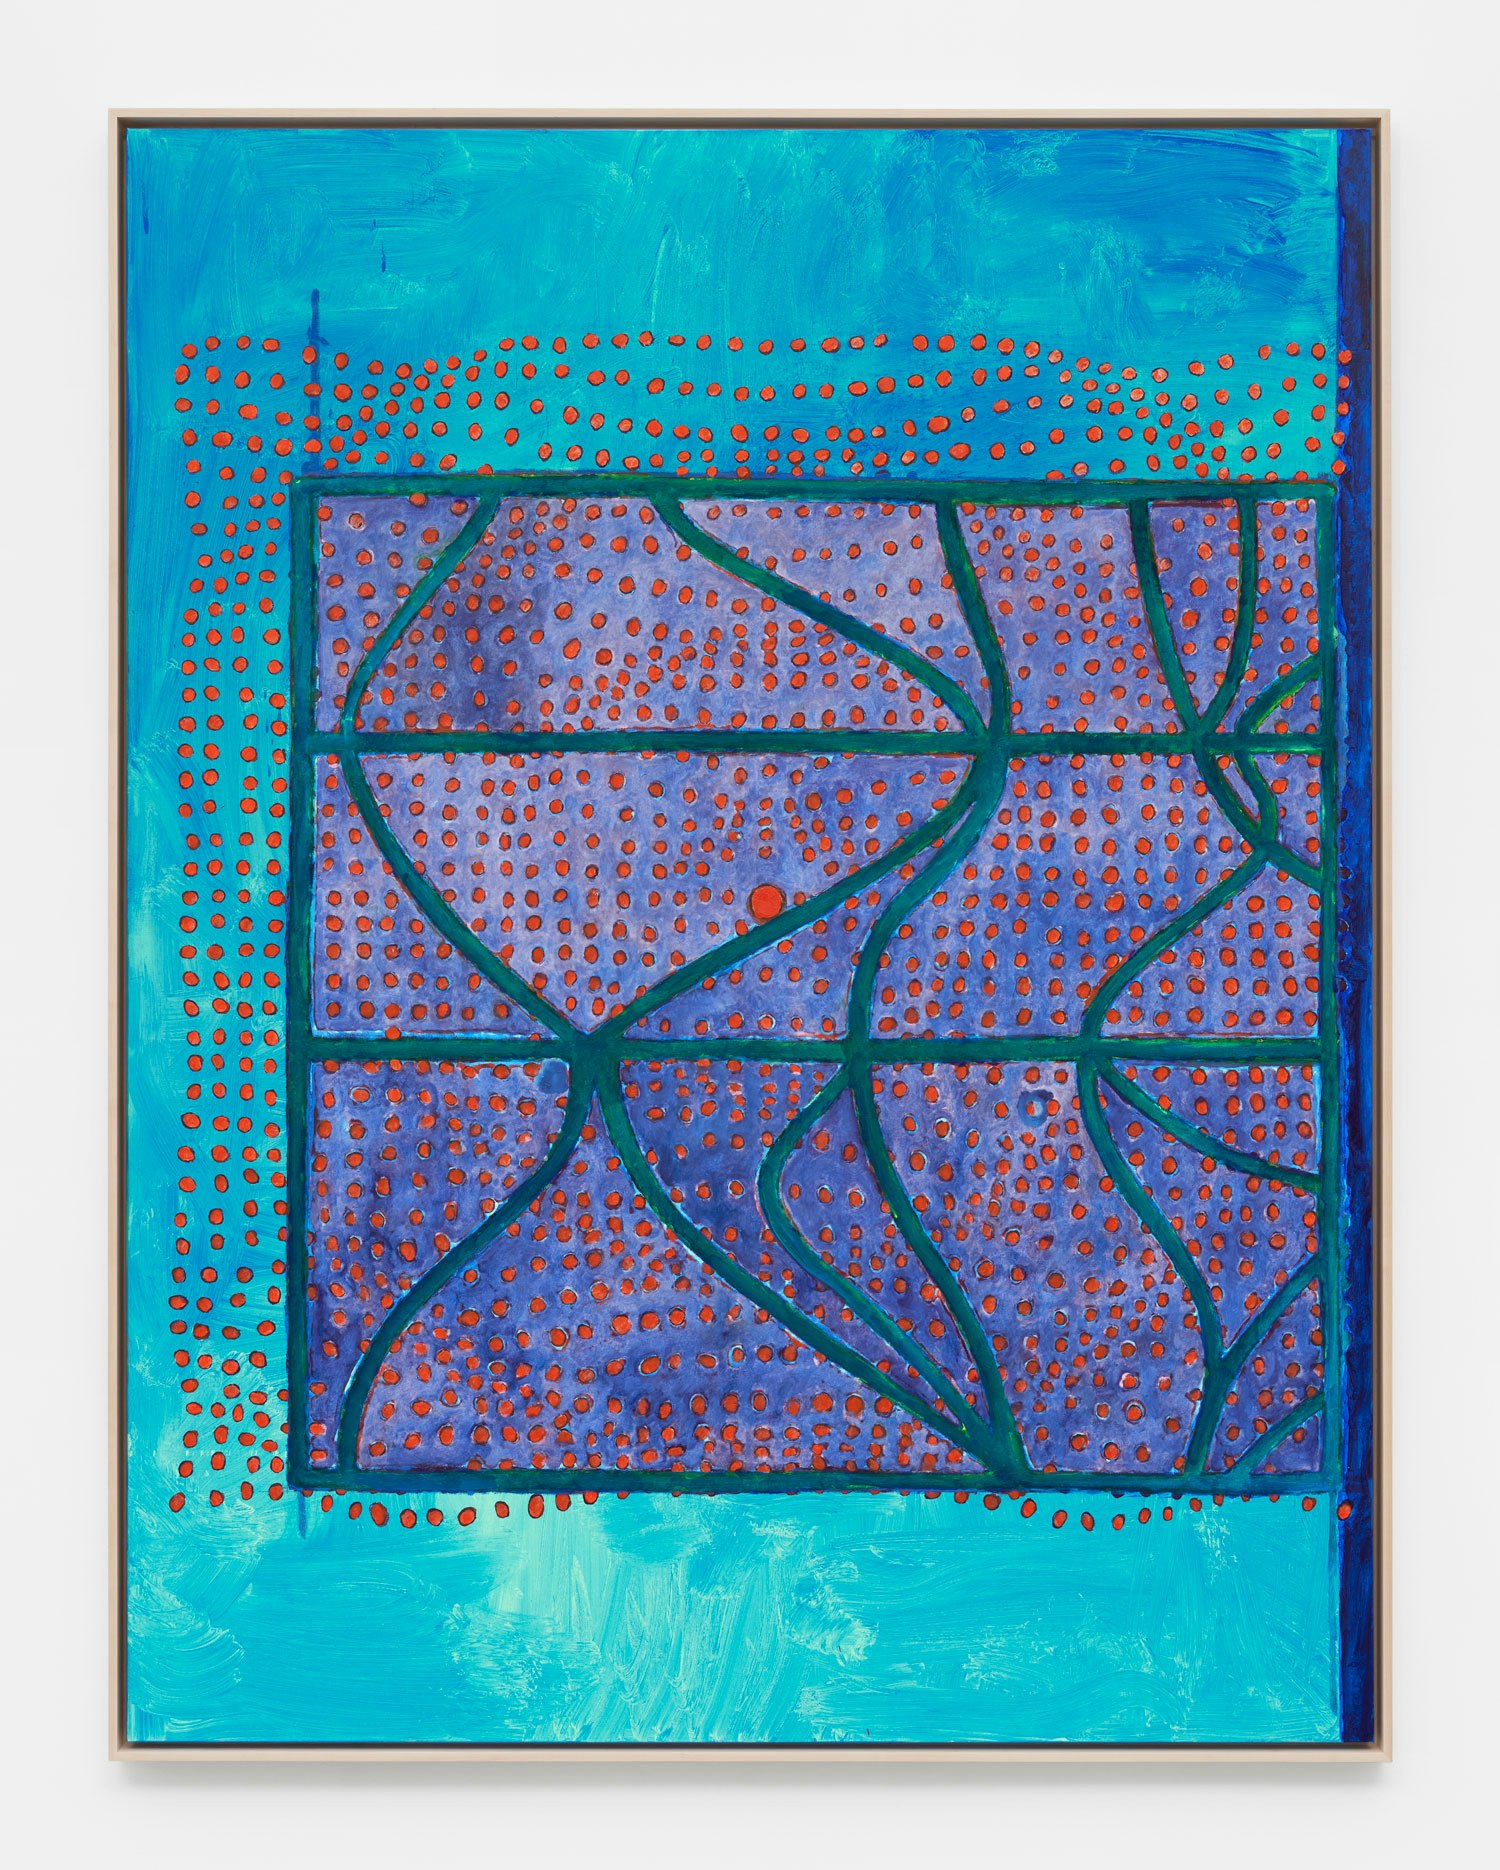 Terry Winters, <em>Index 1</em>, 2021. Oil, wax, and resin on linen, 88 x 68 inches. © Terry Winters, Courtesy Matthew Marks Gallery.